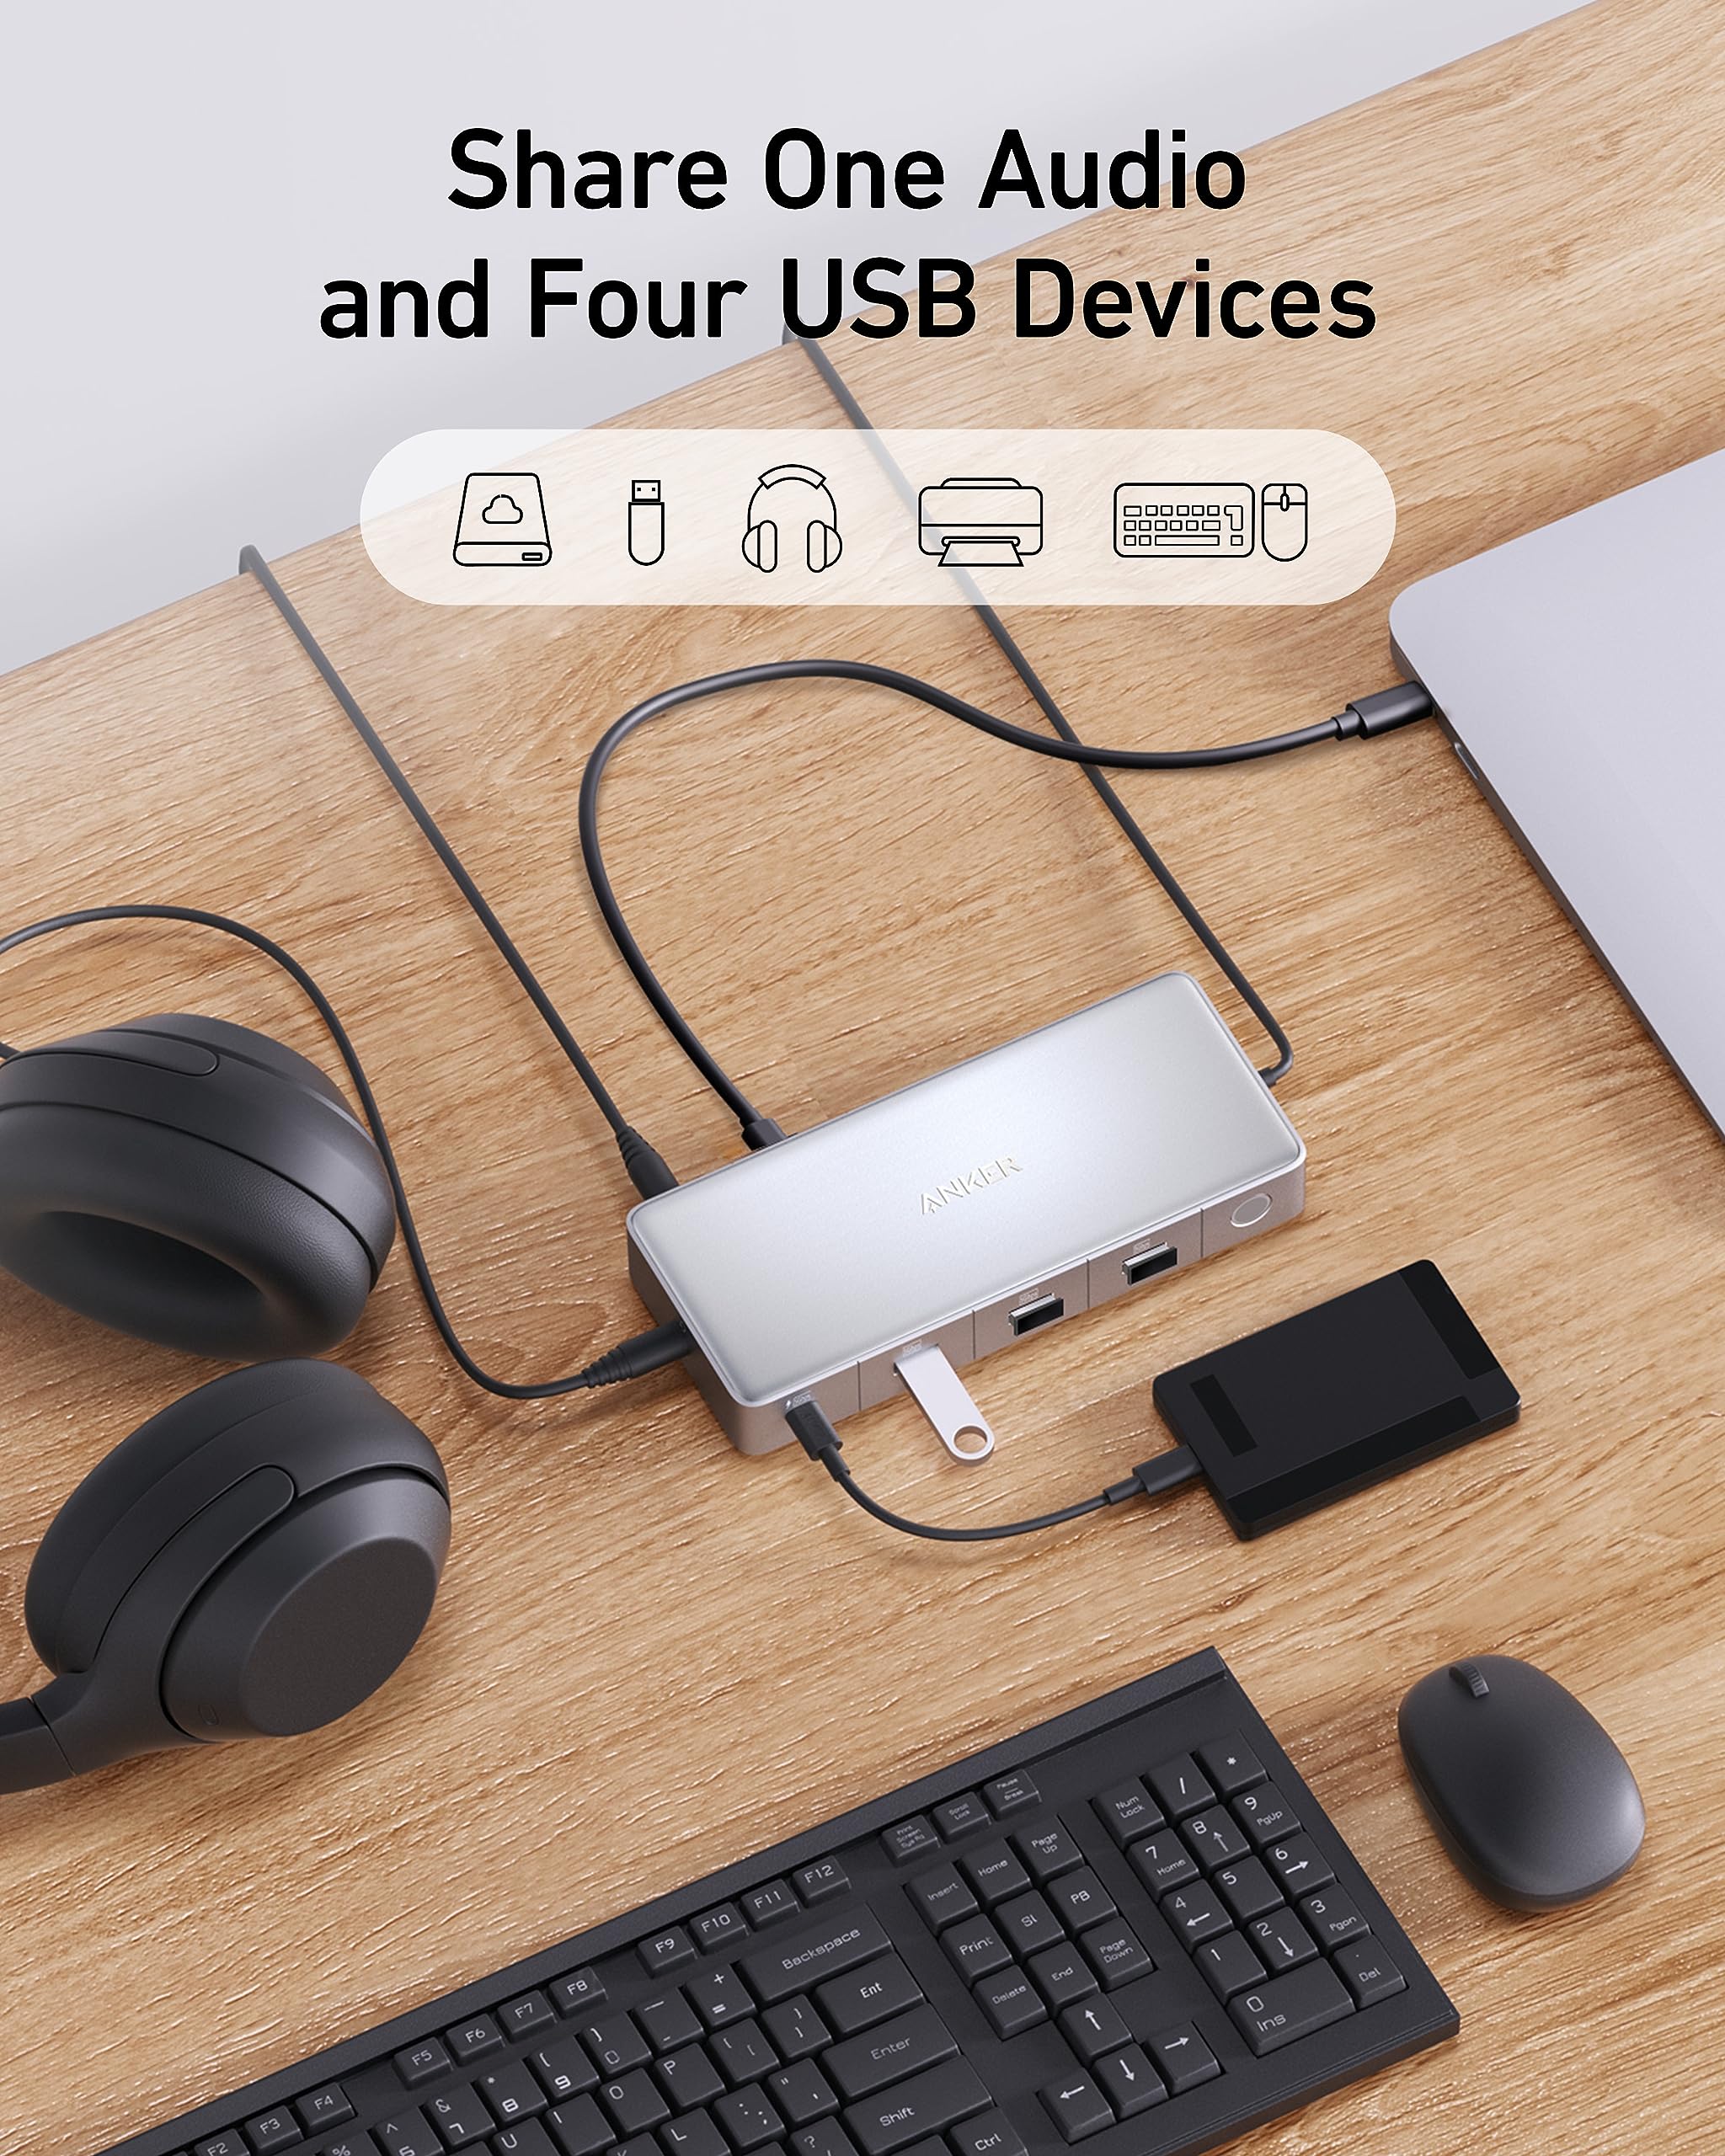 USB Switch 3.0, USB Switcher Share Keyboard Mouse with 2 Computers  Peripheral Switcher Adapter Hub for 4 USB Device with One-Button Swapping  Compatible with Mac/Windows/Linux 